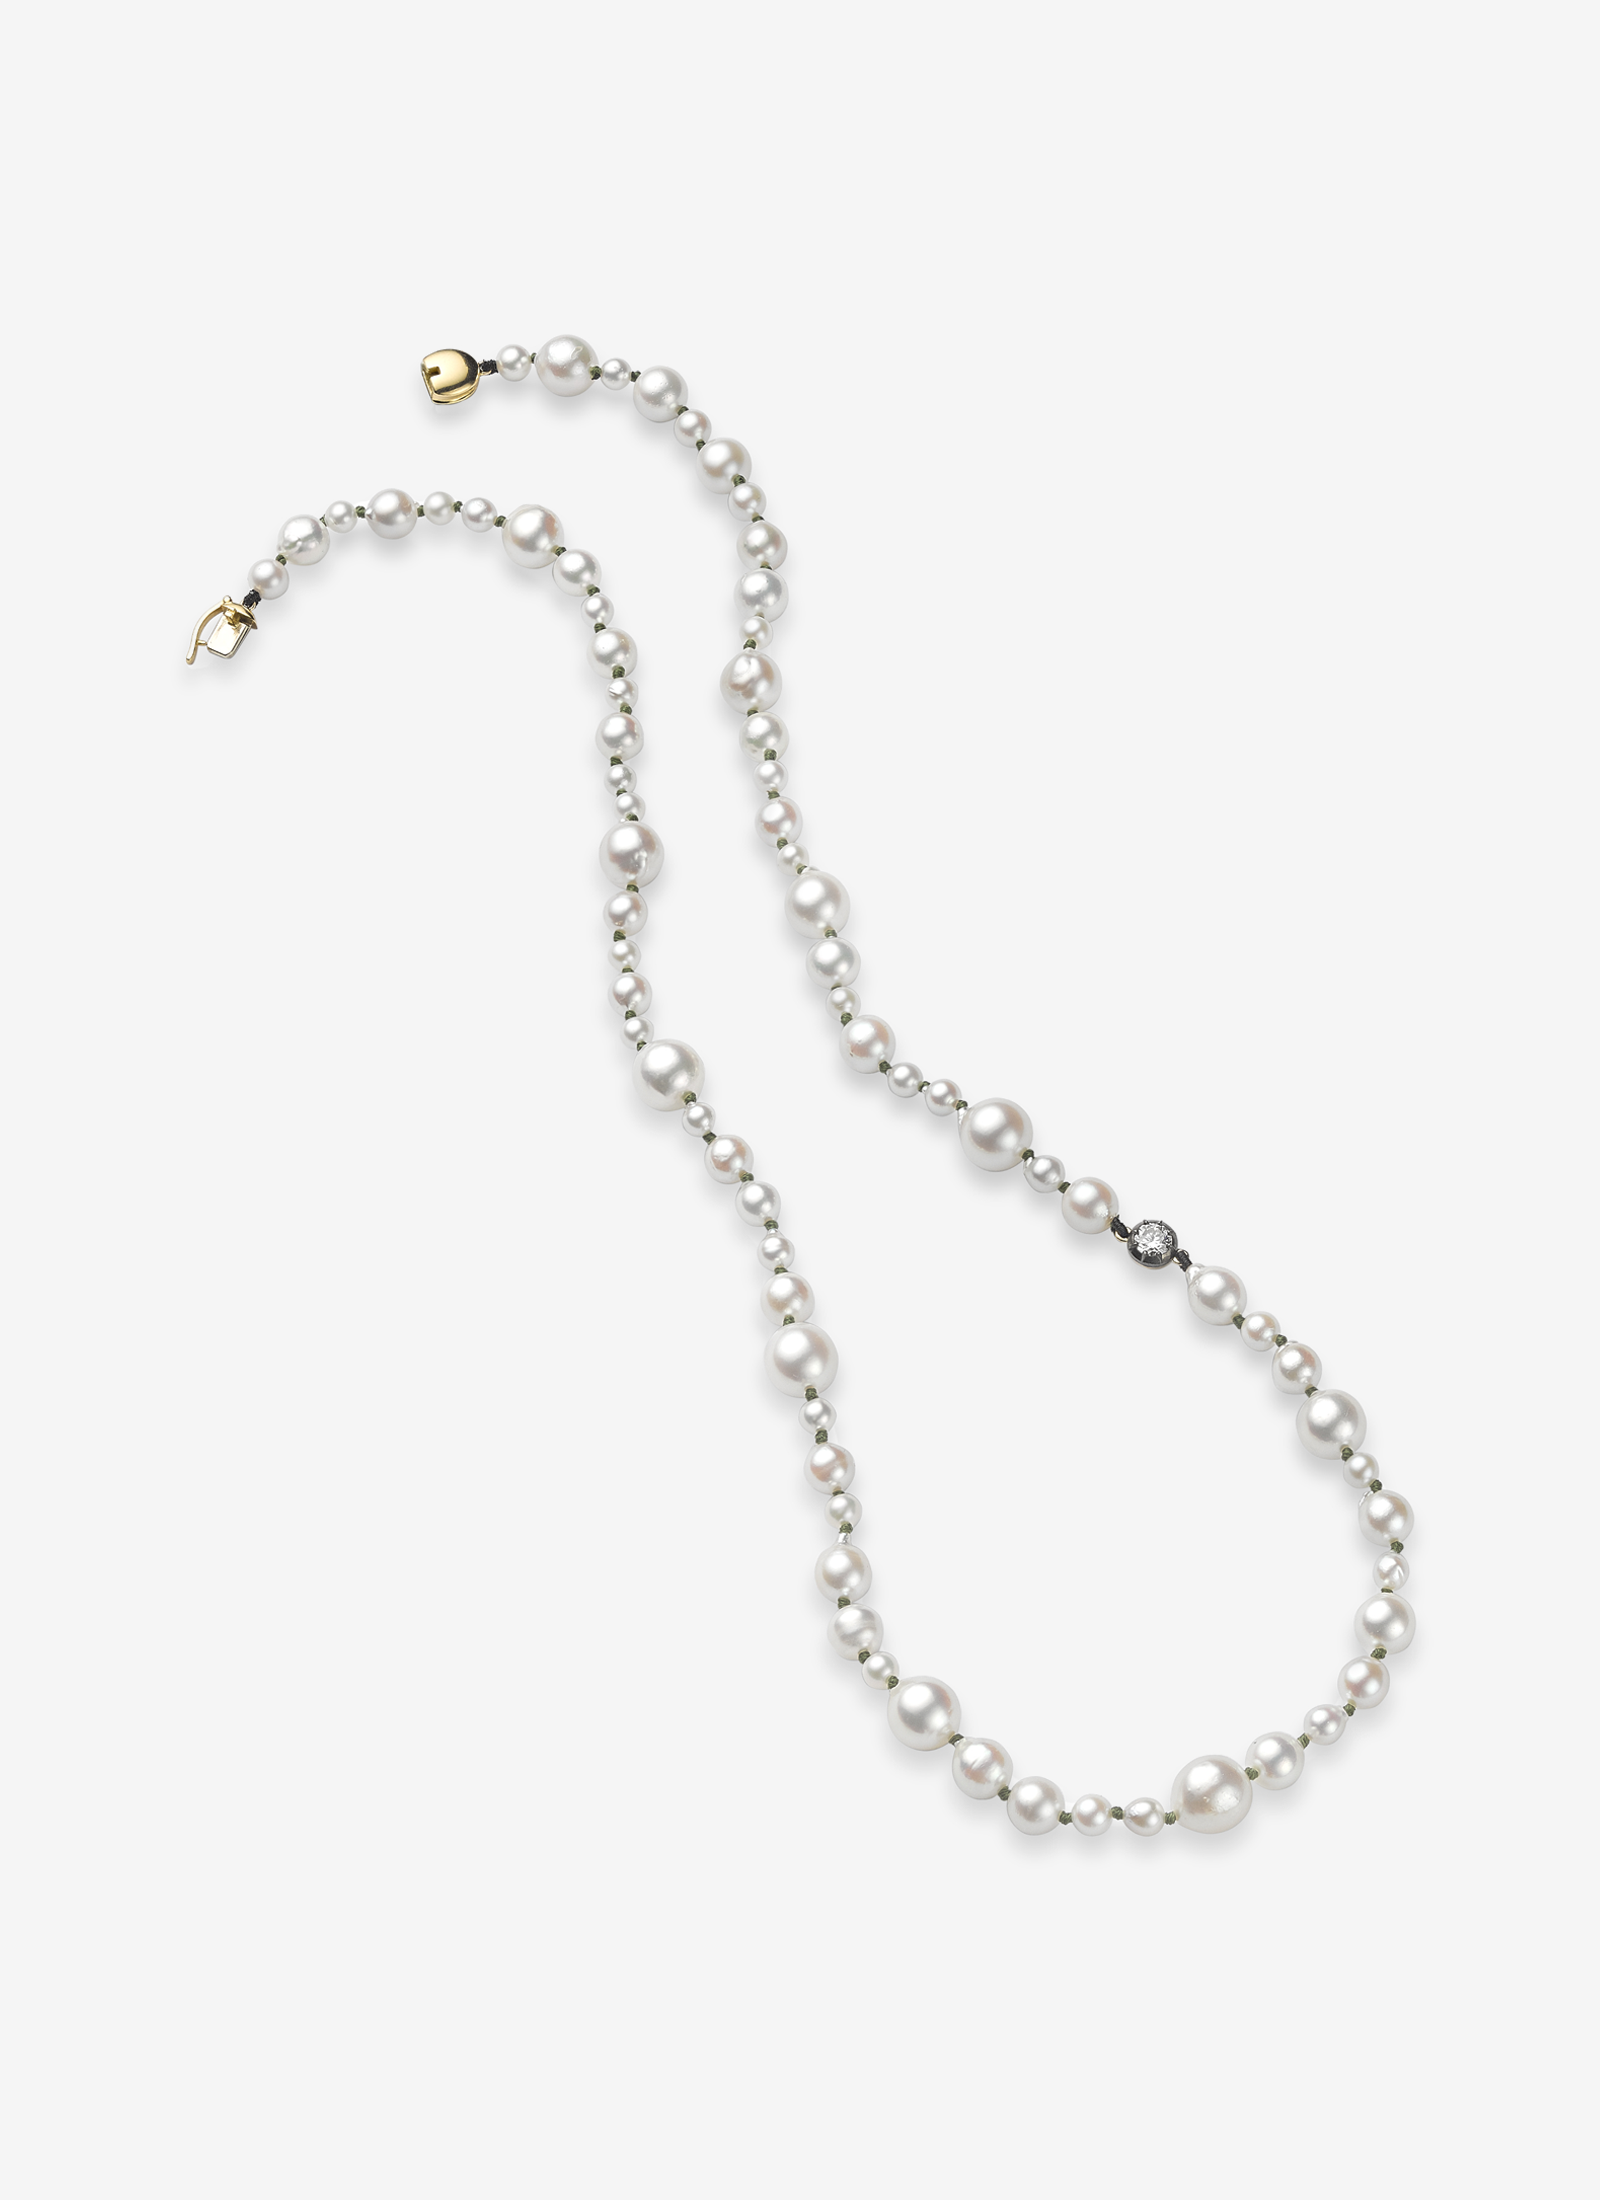 Beaches Pearl Necklace - 21" 18K Gold Necklace with 0.40ct diamond & pearls